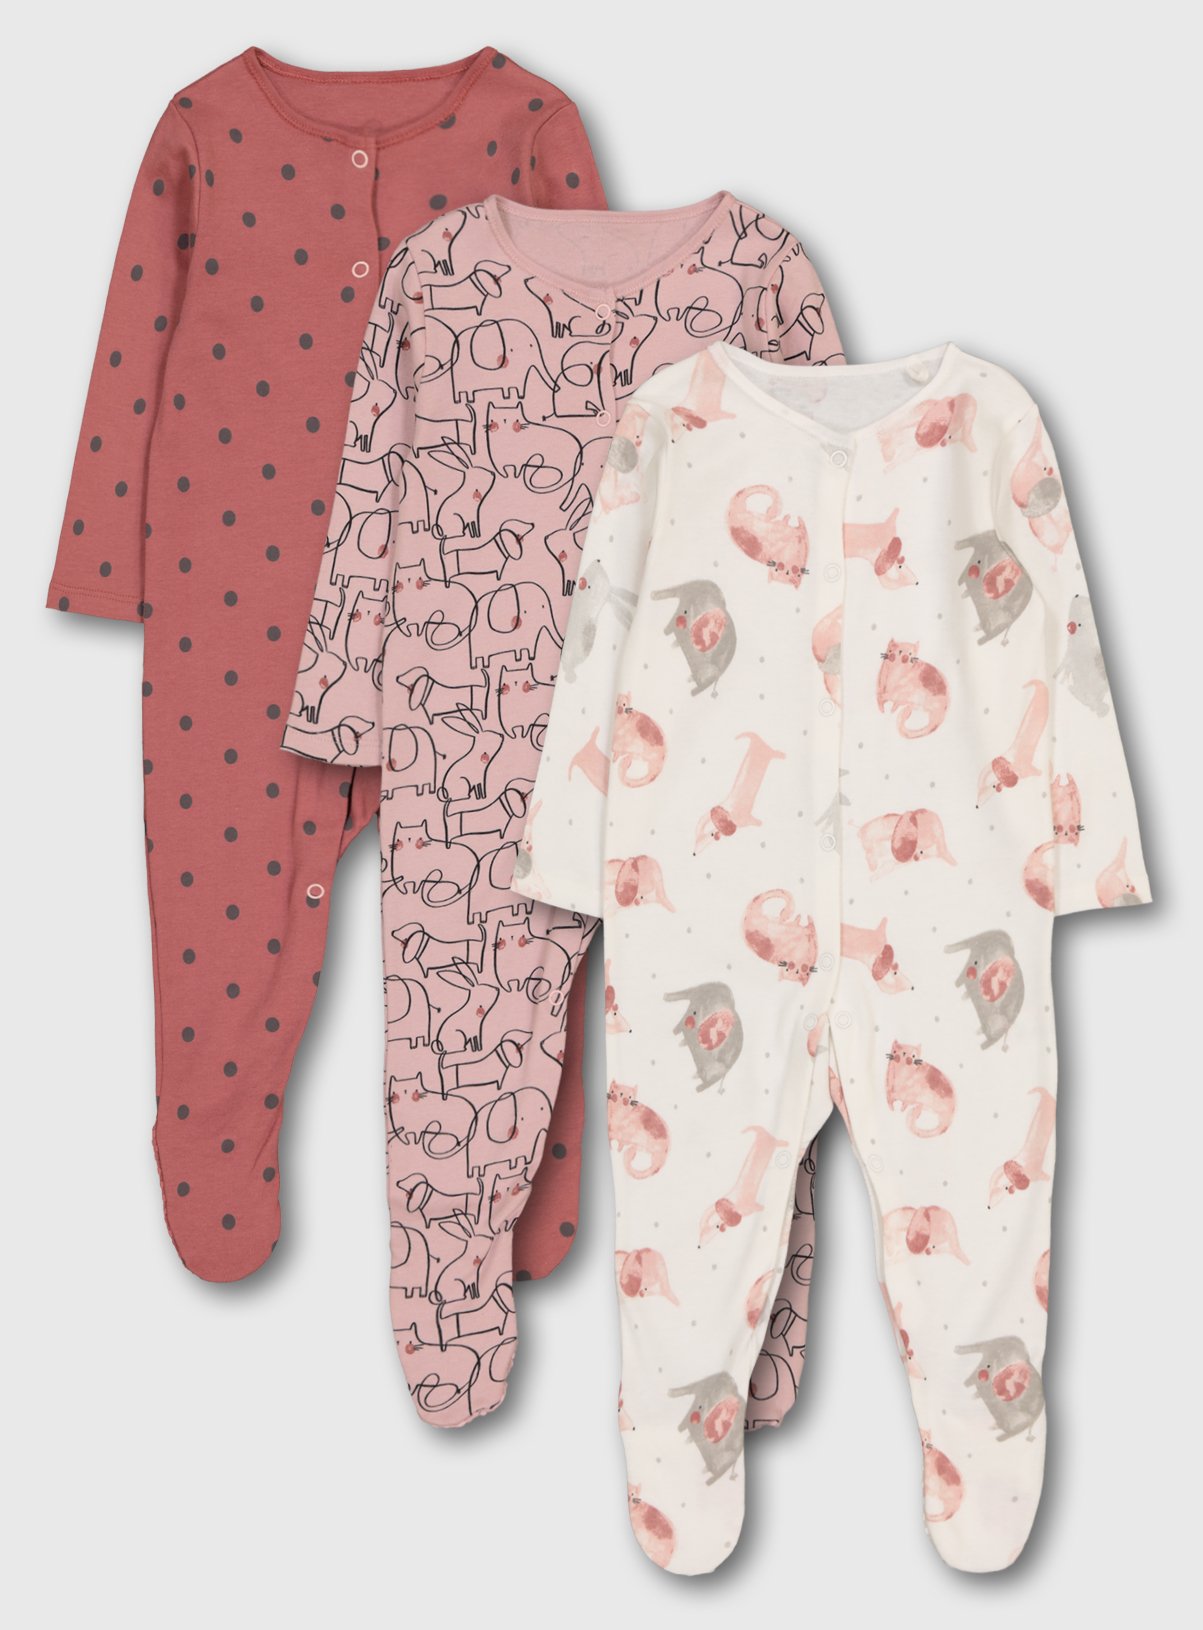 cute sleepsuits for babies